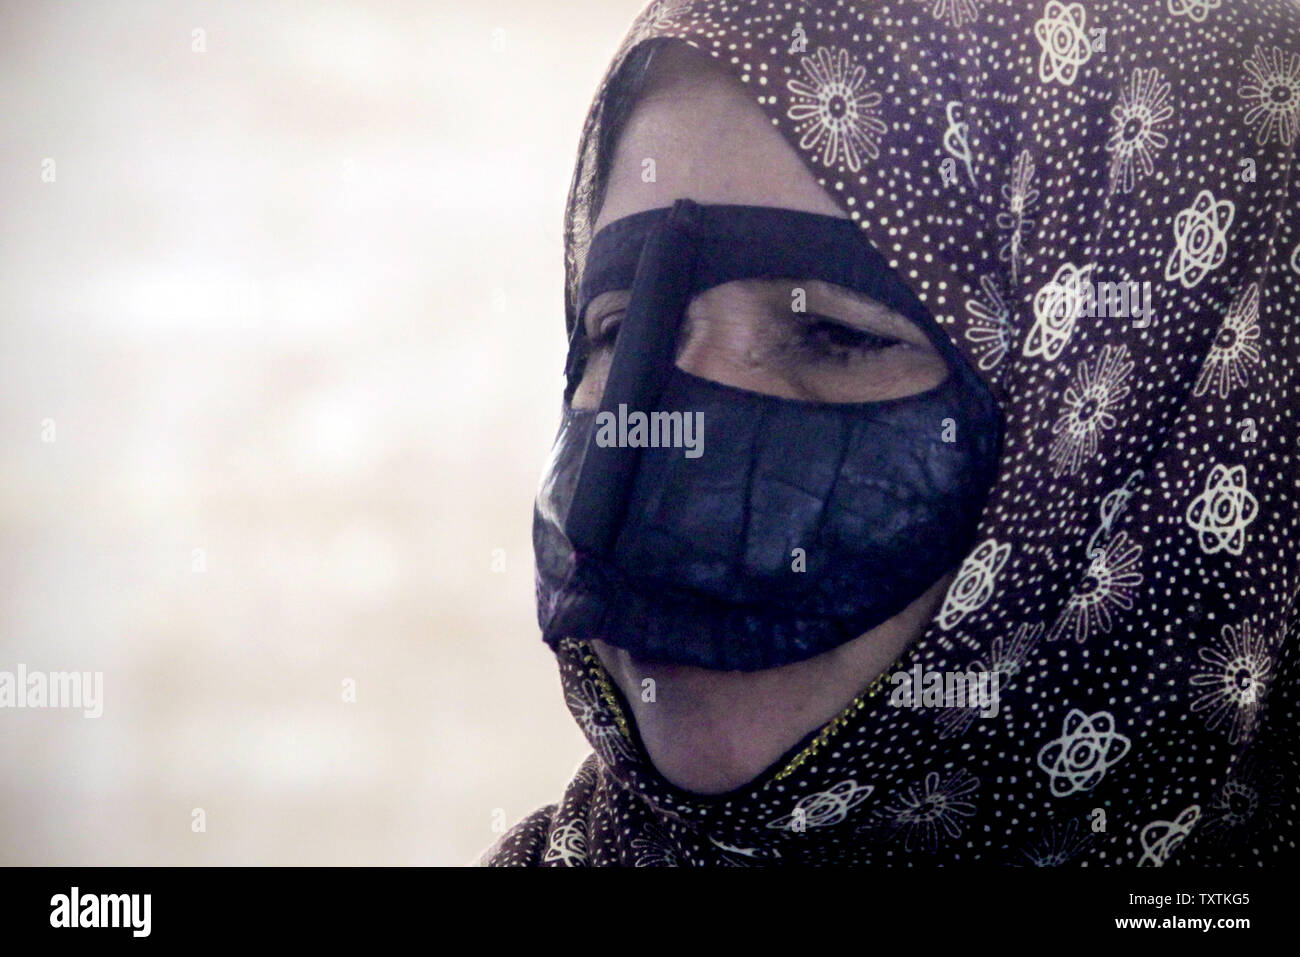 An Iranian woman wears traditional burqa in Qeshm Island on Dec 24, 2011. Qeshm Island is located at southern part of Iran in the Hormoz Strait.     UPI/Maryam Rahmanian Stock Photo